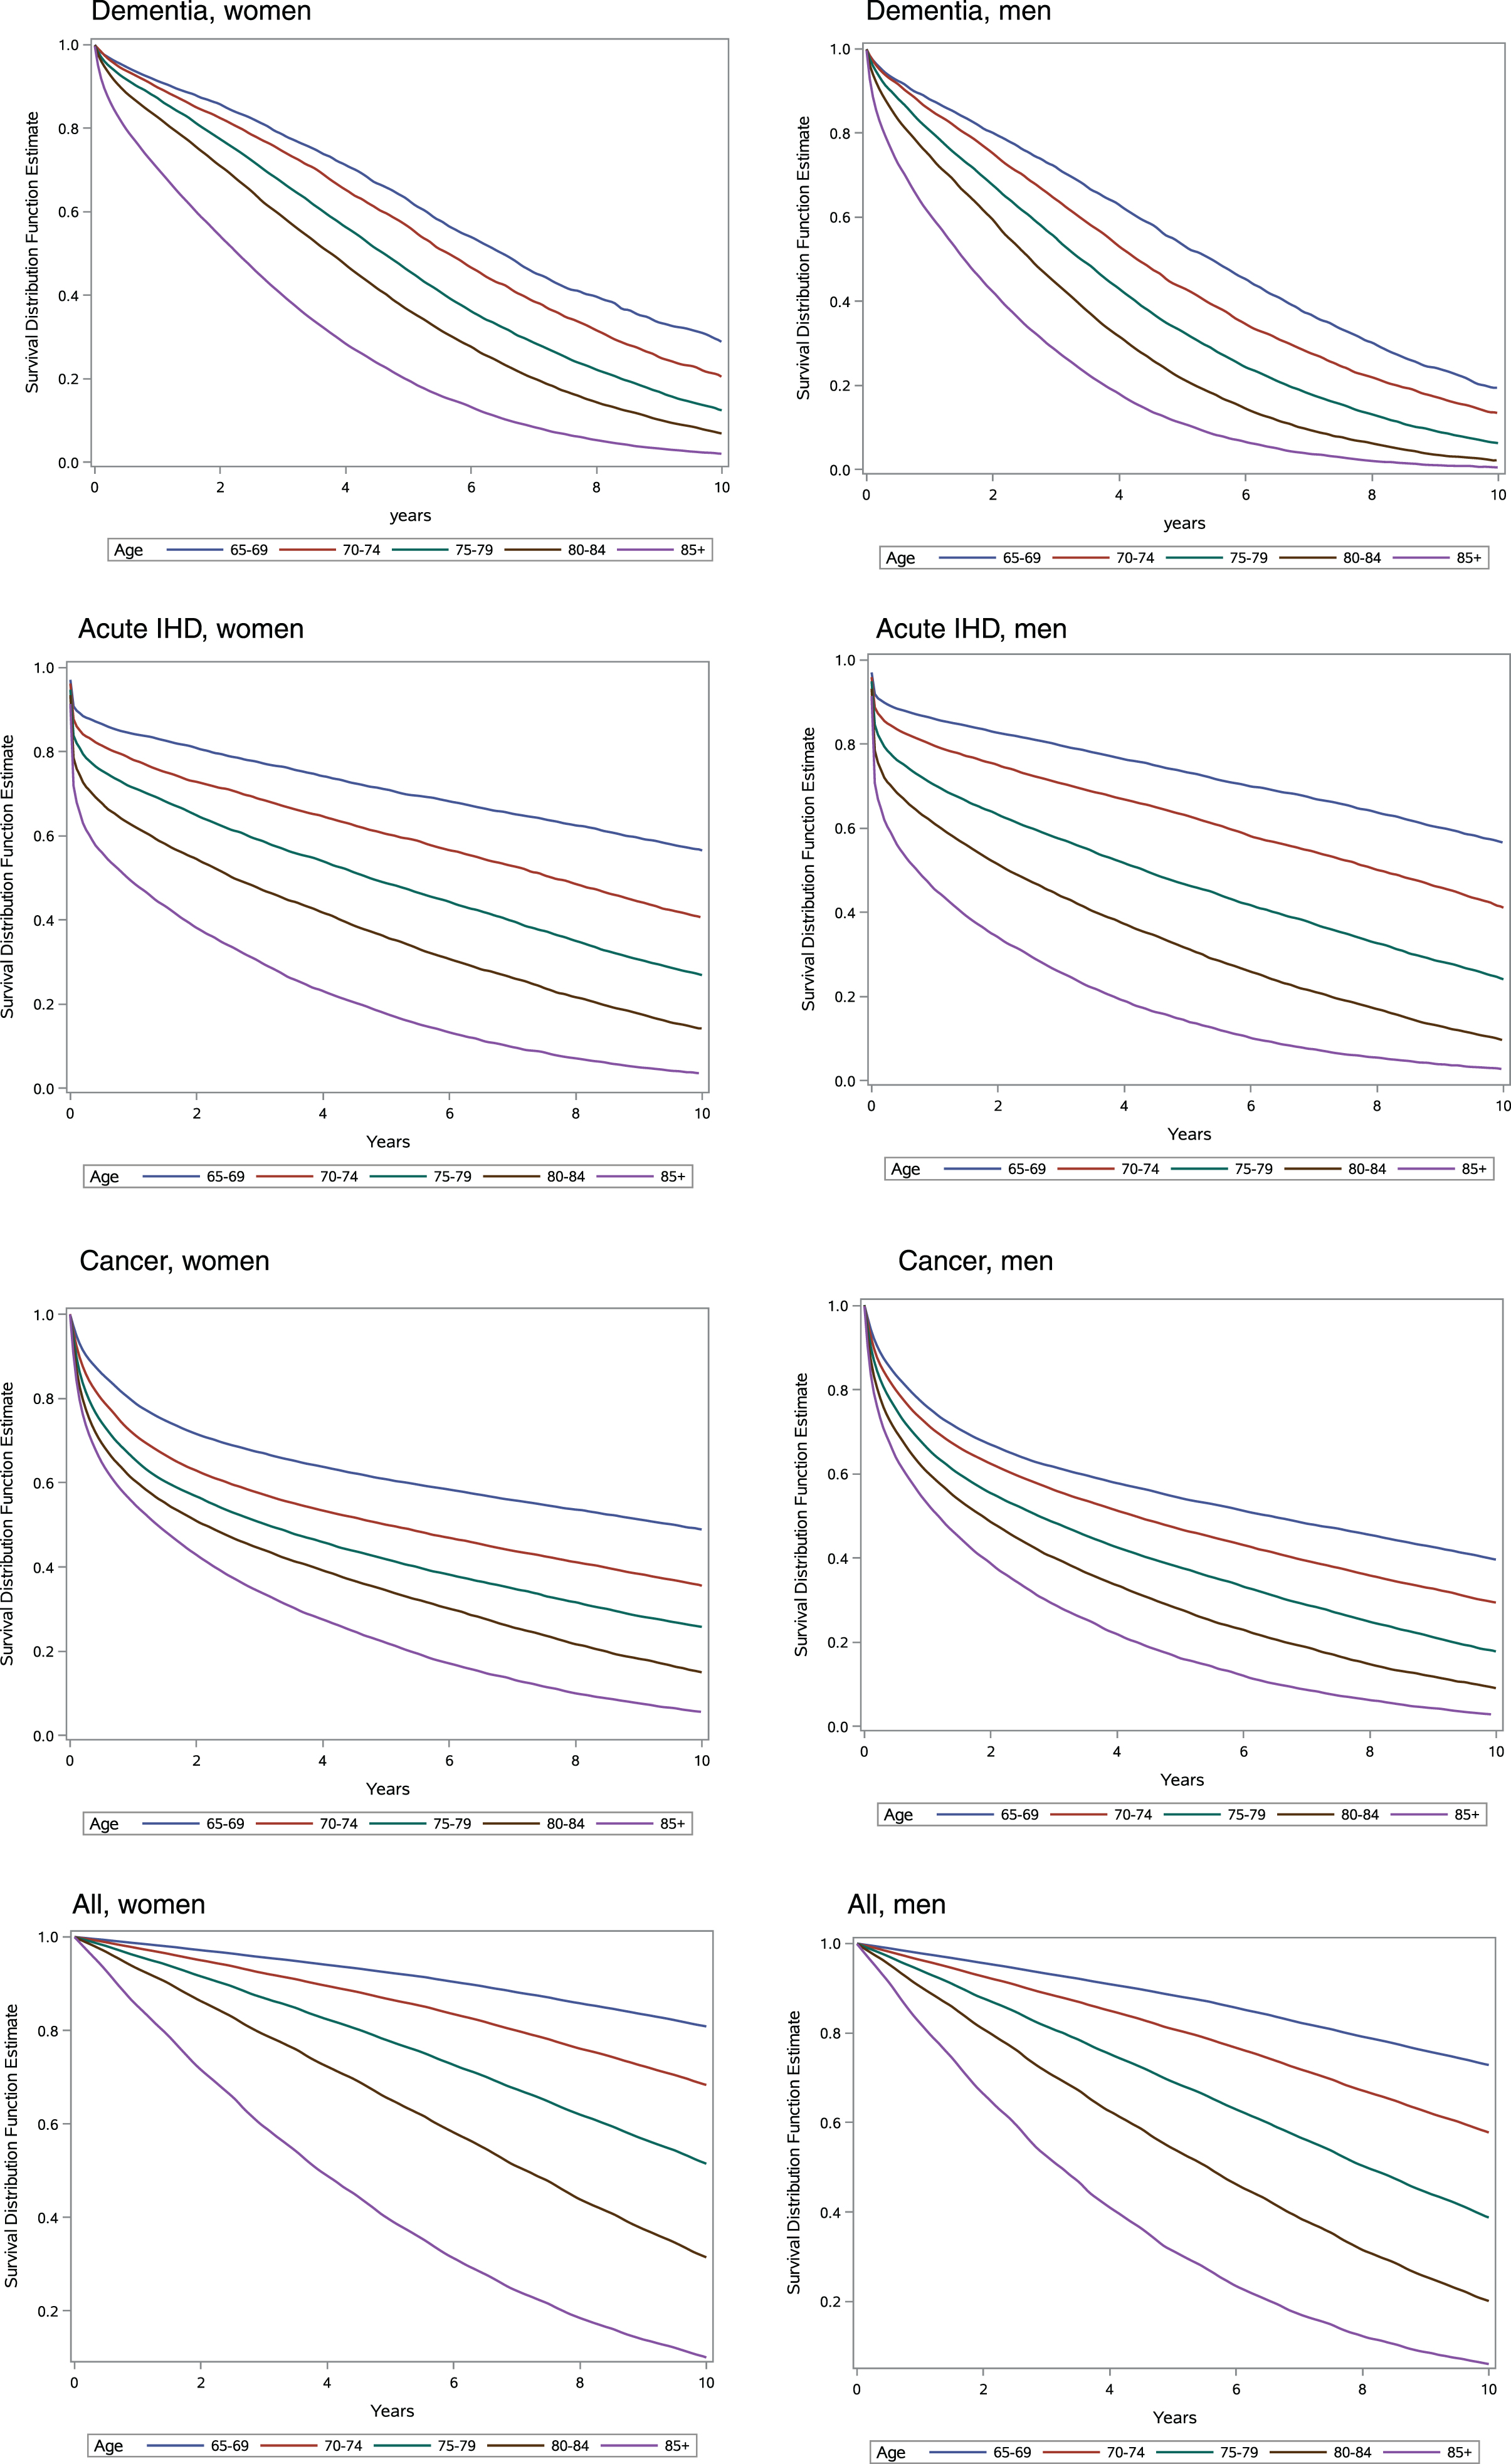 Survival for women and men. Age-stratified Kaplan-Meier survival curves for women and men with dementia, acute ischemic heart disease (IHD), cancer, and the general elderly population, 2000–2015.